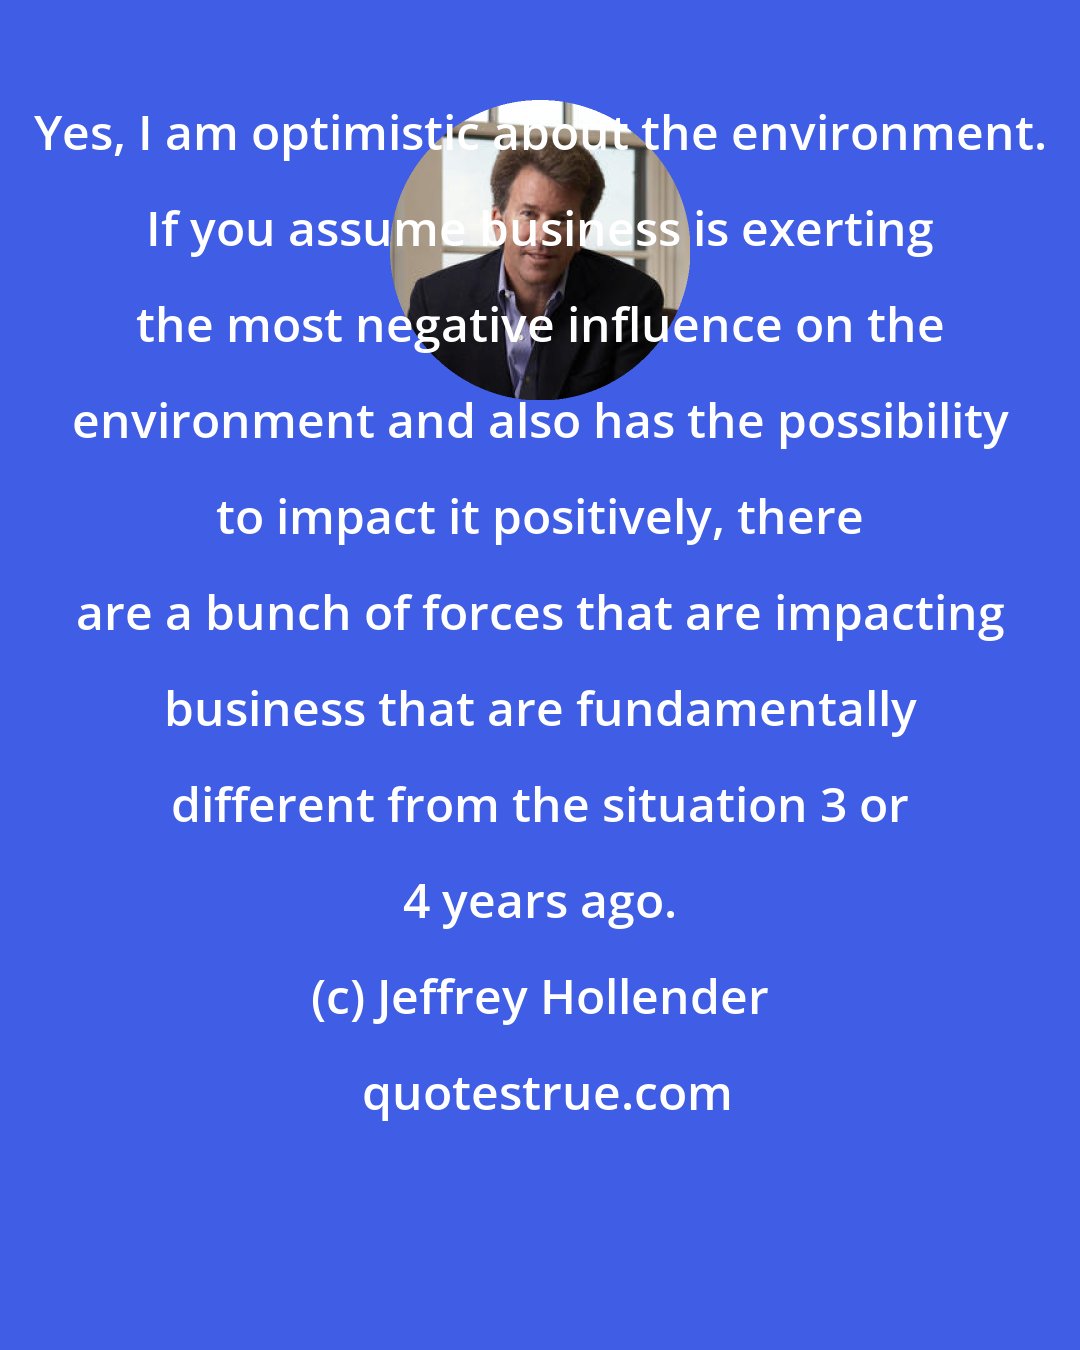 Jeffrey Hollender: Yes, I am optimistic about the environment. If you assume business is exerting the most negative influence on the environment and also has the possibility to impact it positively, there are a bunch of forces that are impacting business that are fundamentally different from the situation 3 or 4 years ago.